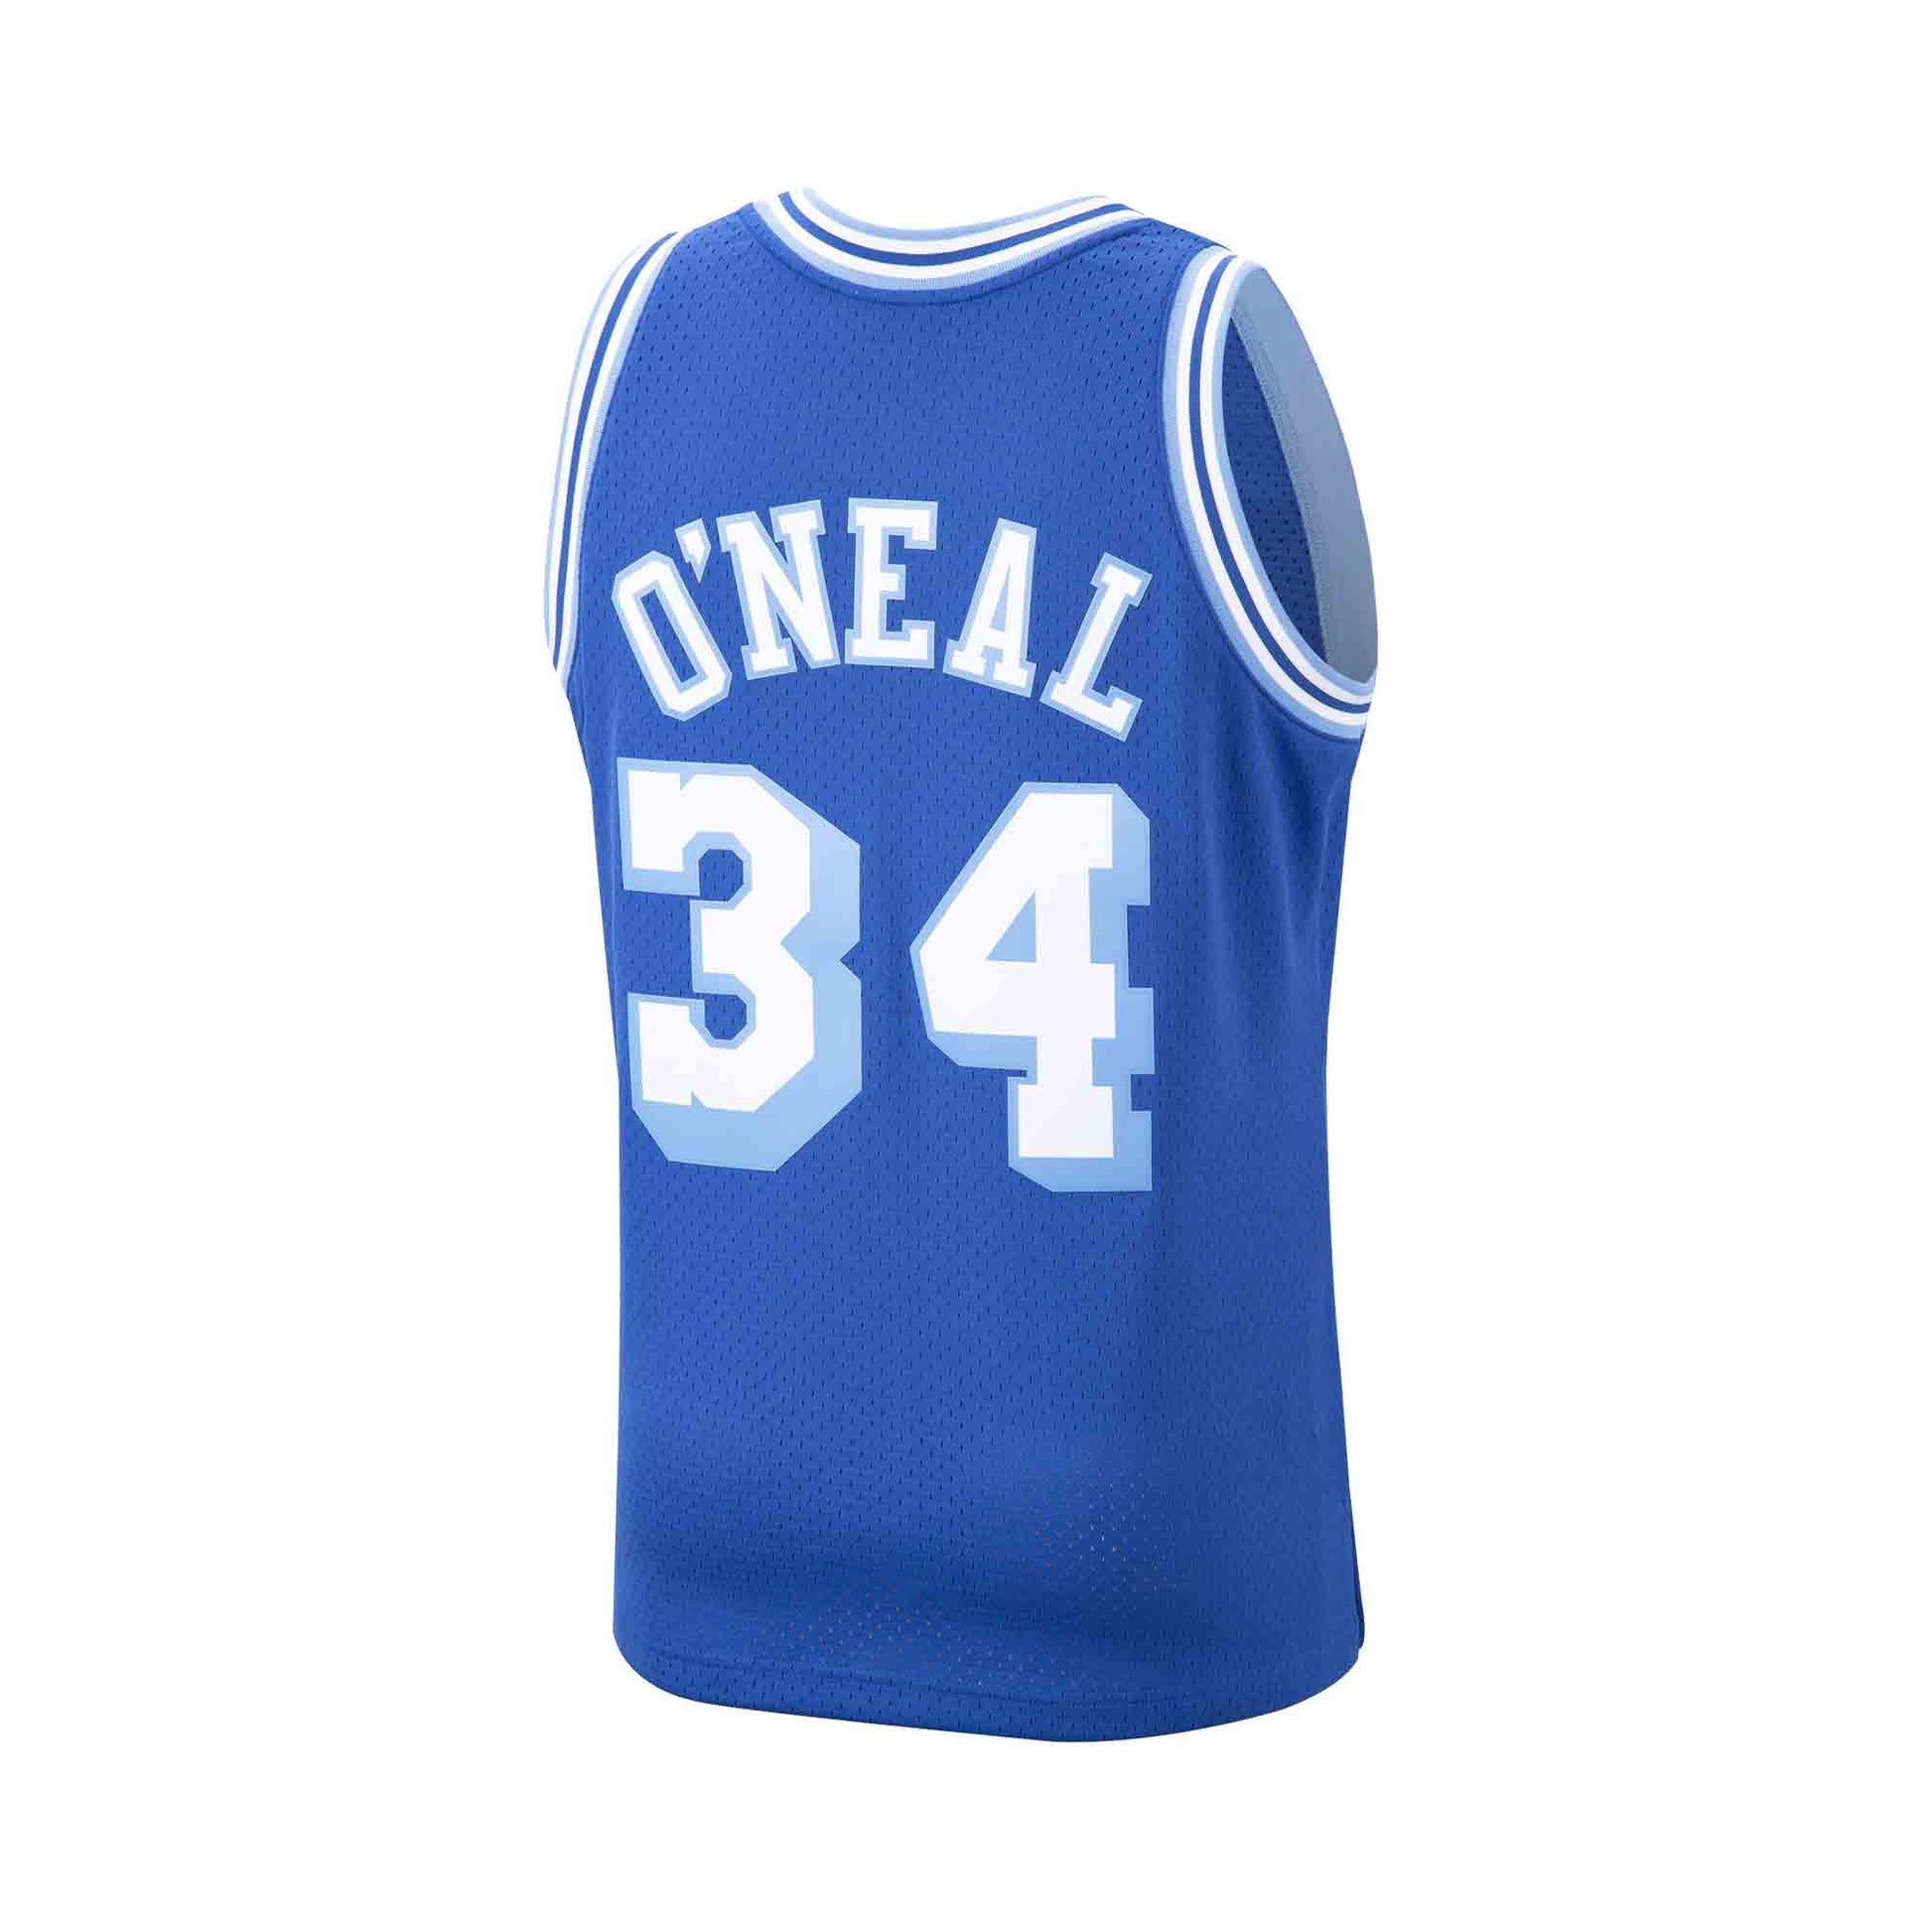 Mitchell & Ness Los Angeles Lakers Swingman Jersey - Shaquille O'Neal L